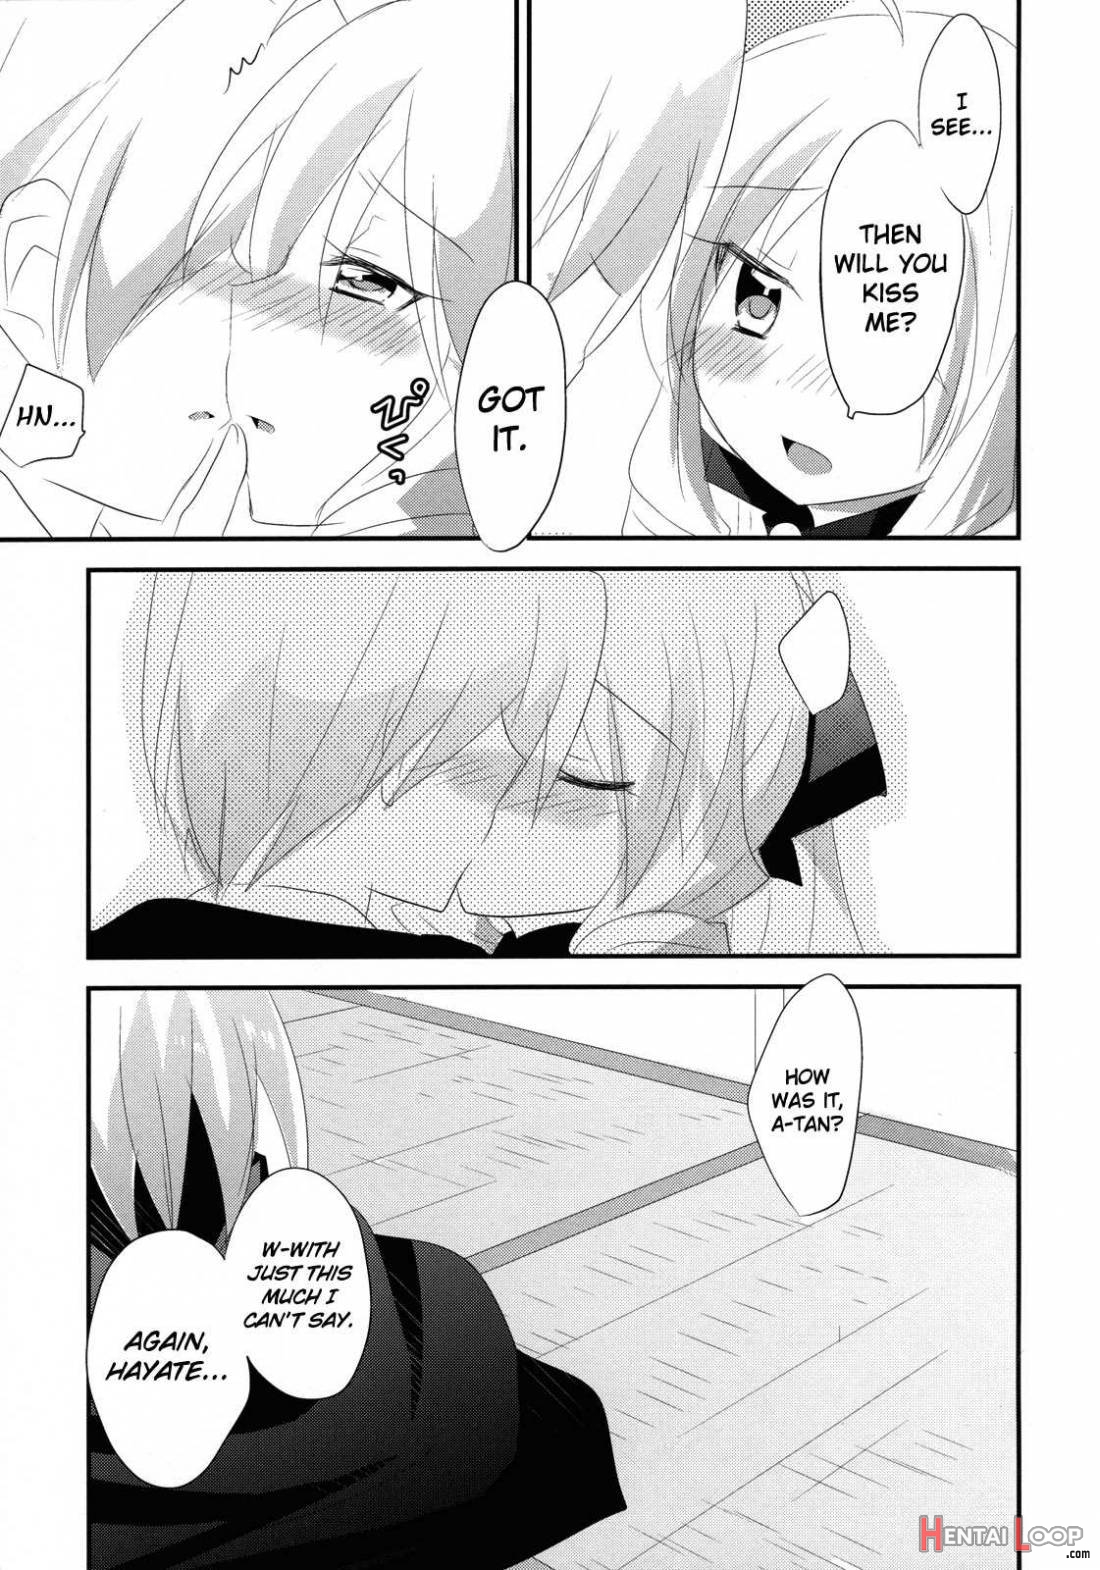 The Simple Work Of Loving A-Tan Alone page 4